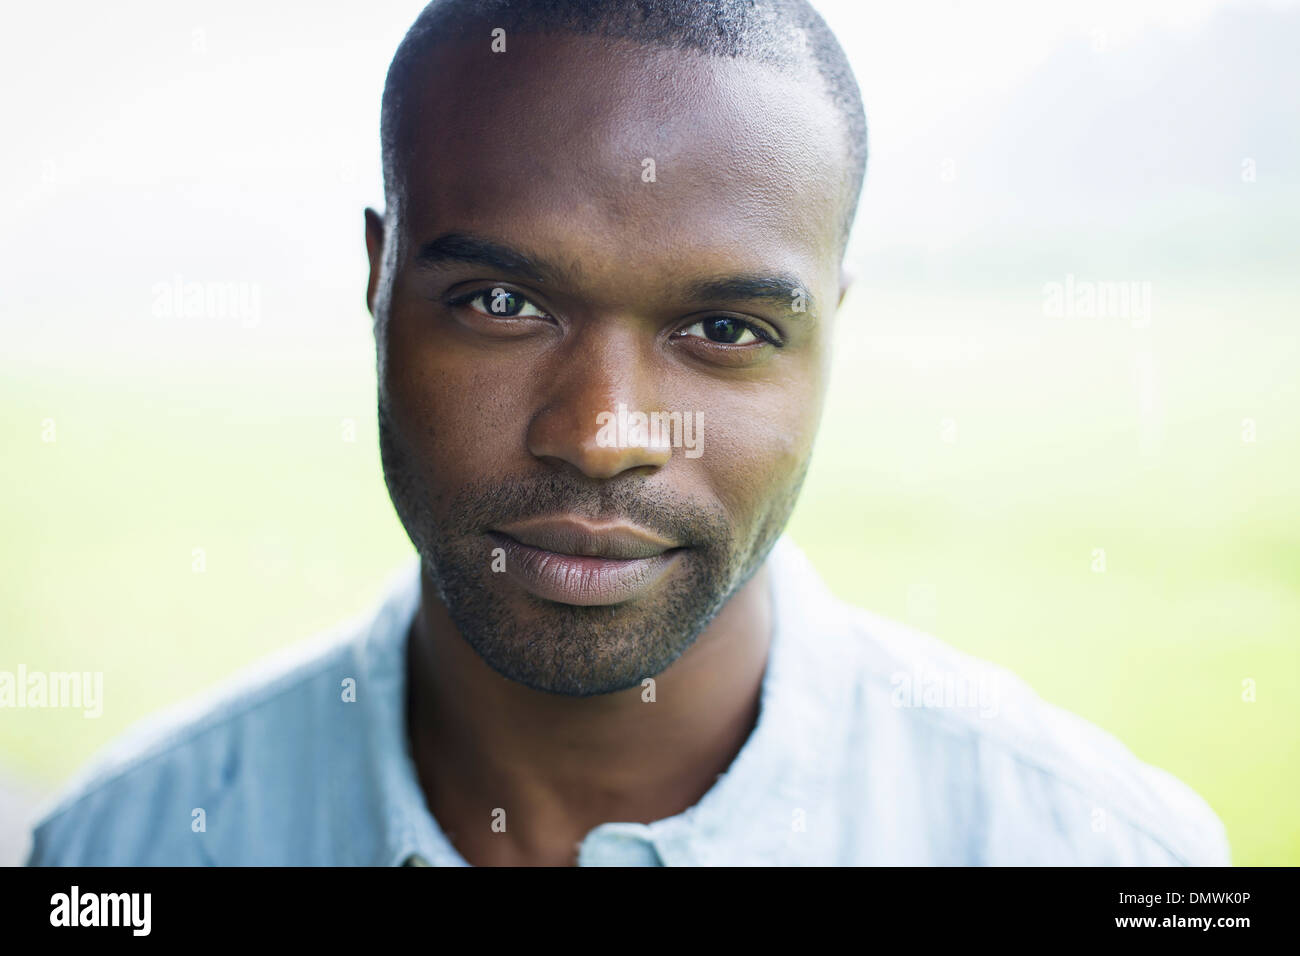 A young man in a blue shirt. Stock Photo